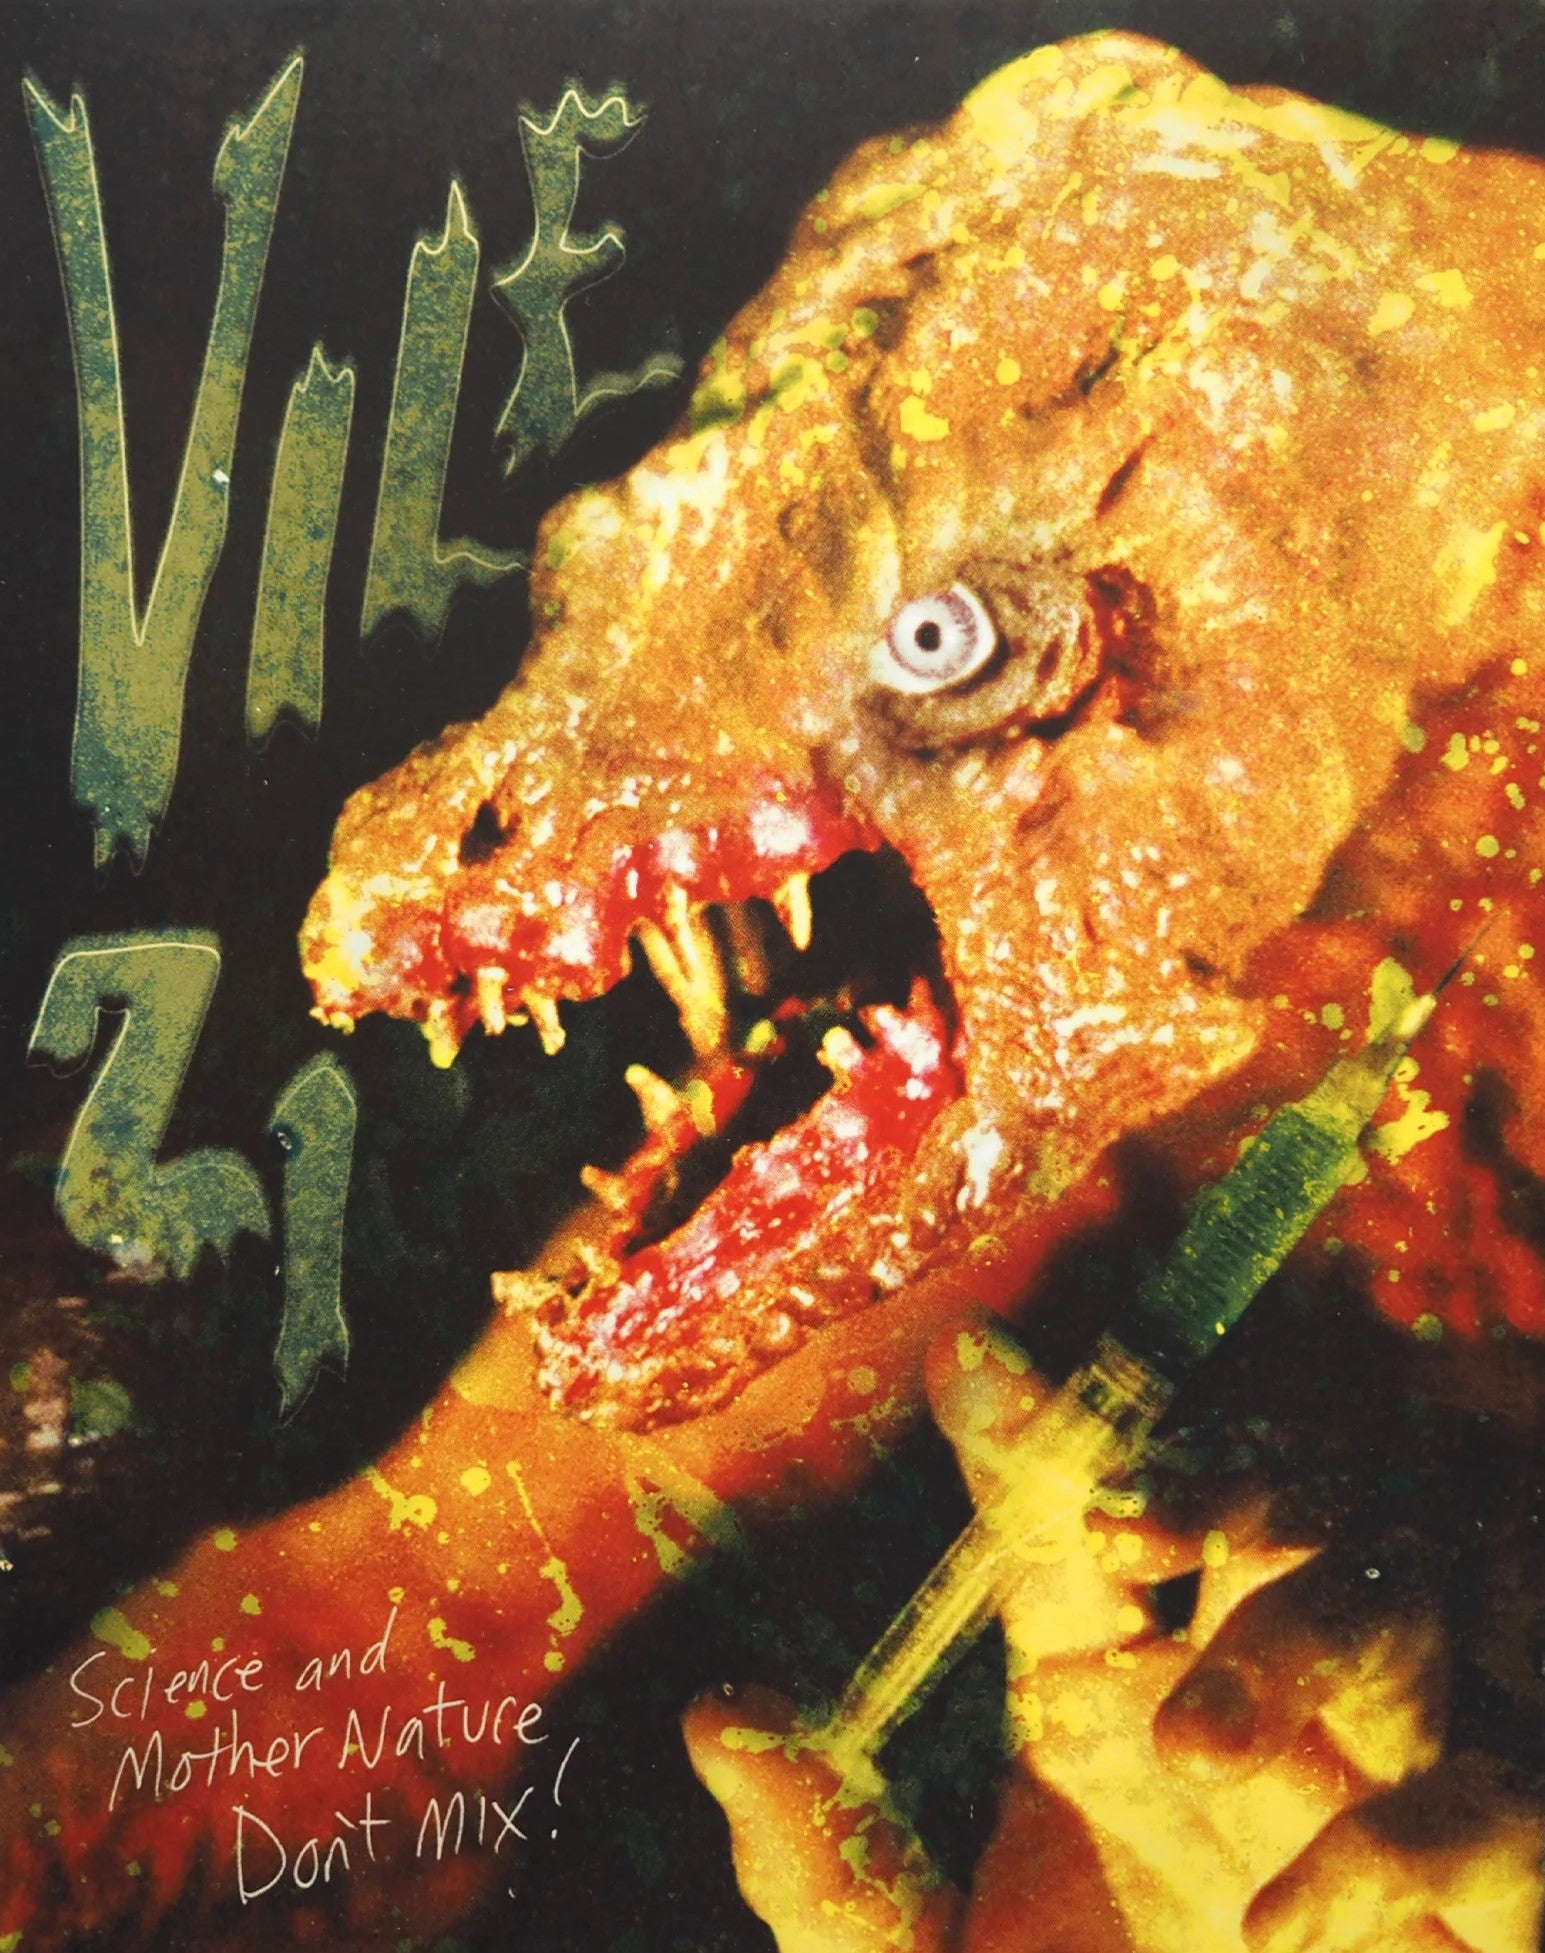 VILE 21 (LIMITED EDITION) BLU-RAY